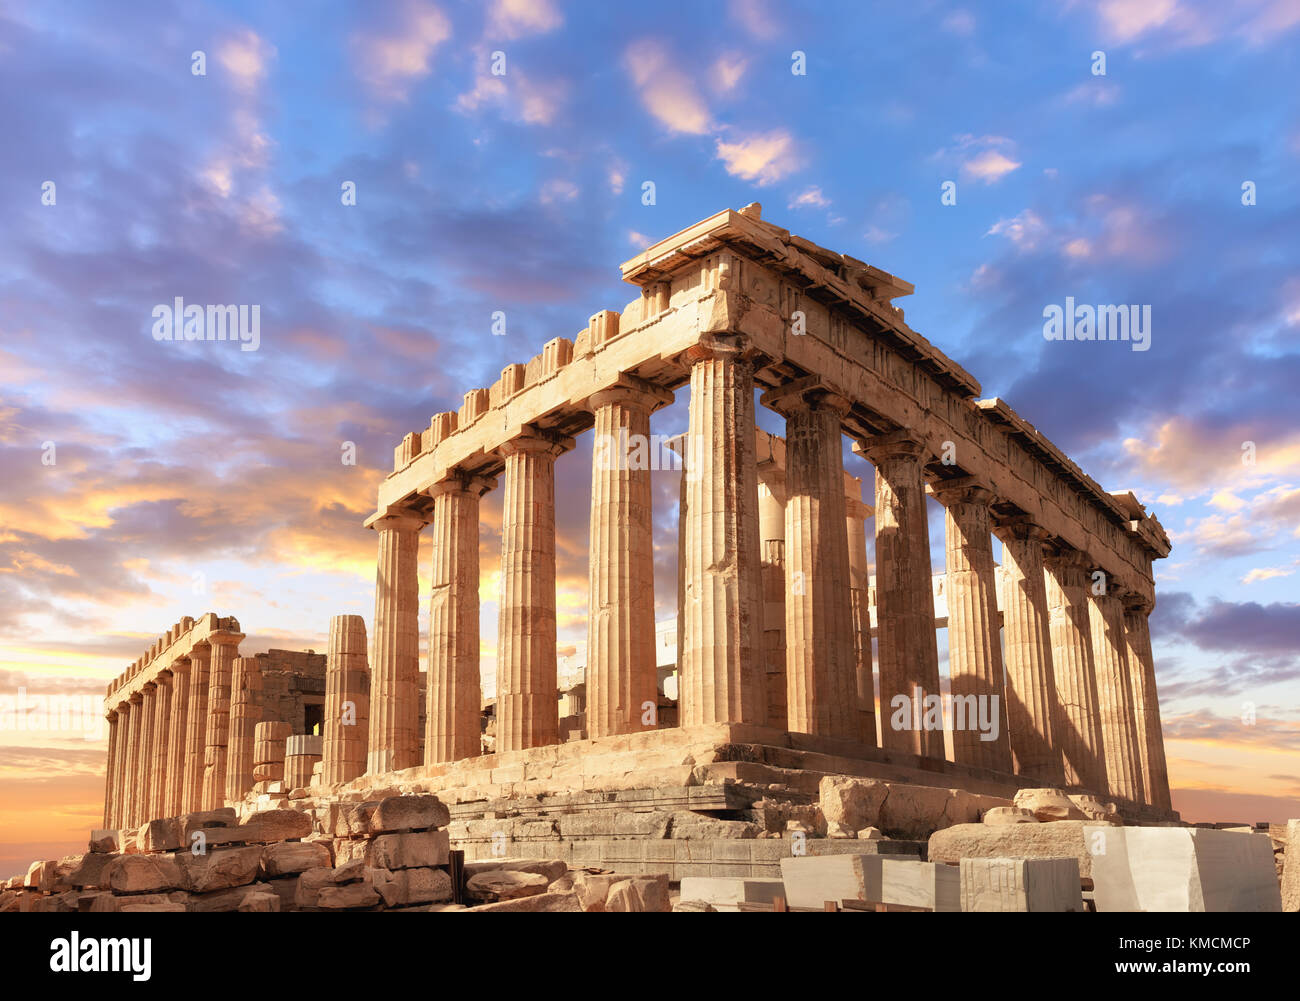 Parthenon temple on a sinset. Acropolis in Athens, Greece, This picture is toned. Stock Photo